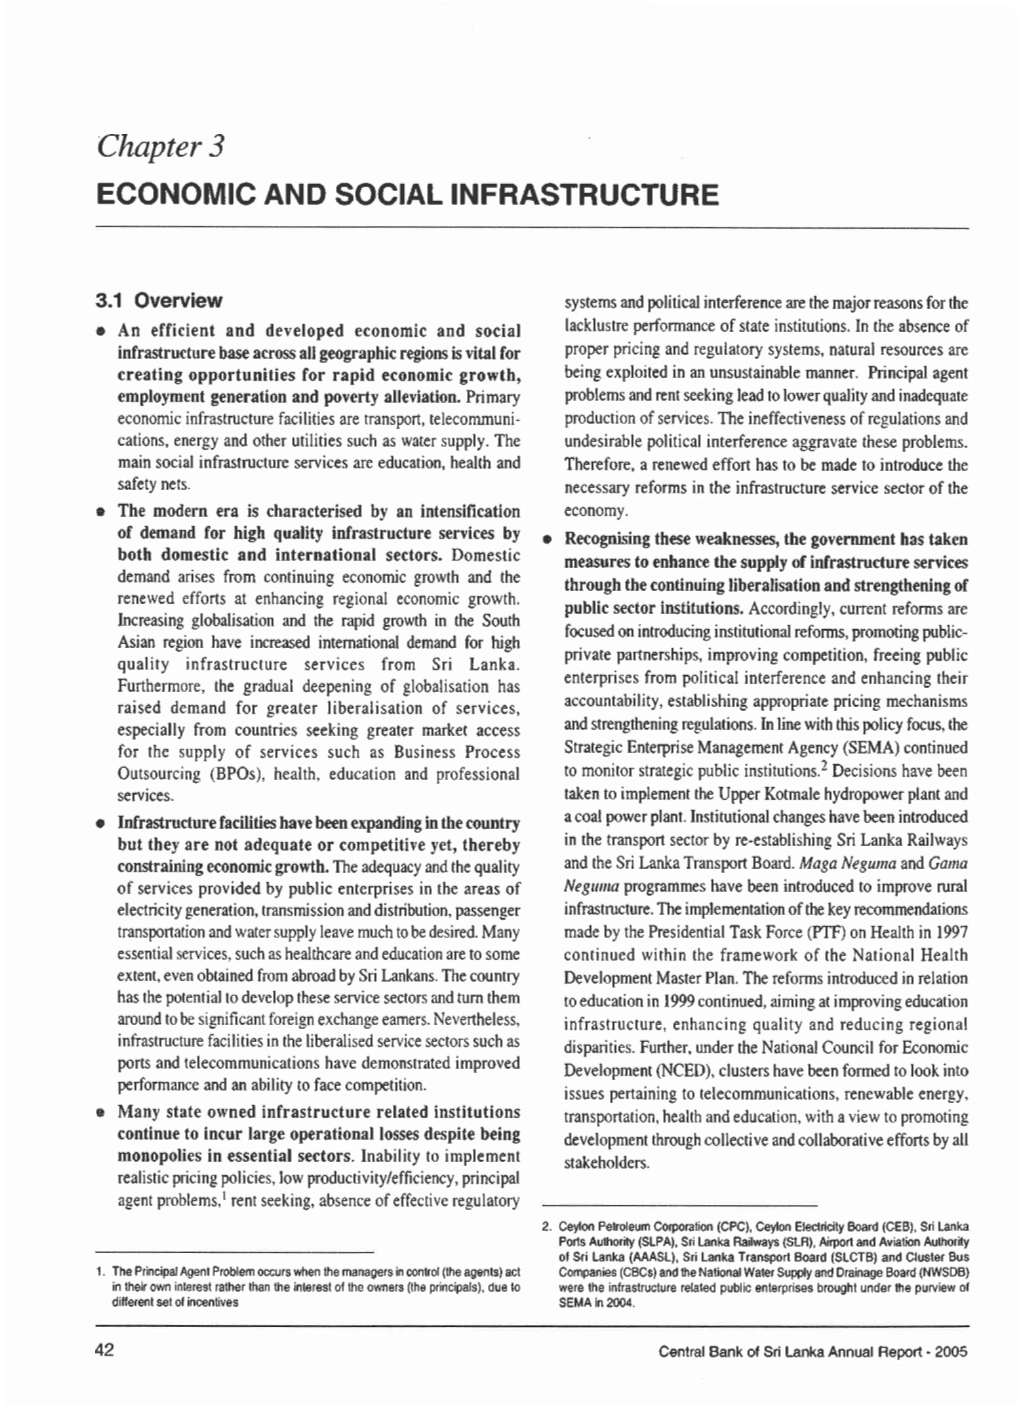 Chapter 3 ECONOMIC and SOCIAL INFRASTRUCTURE